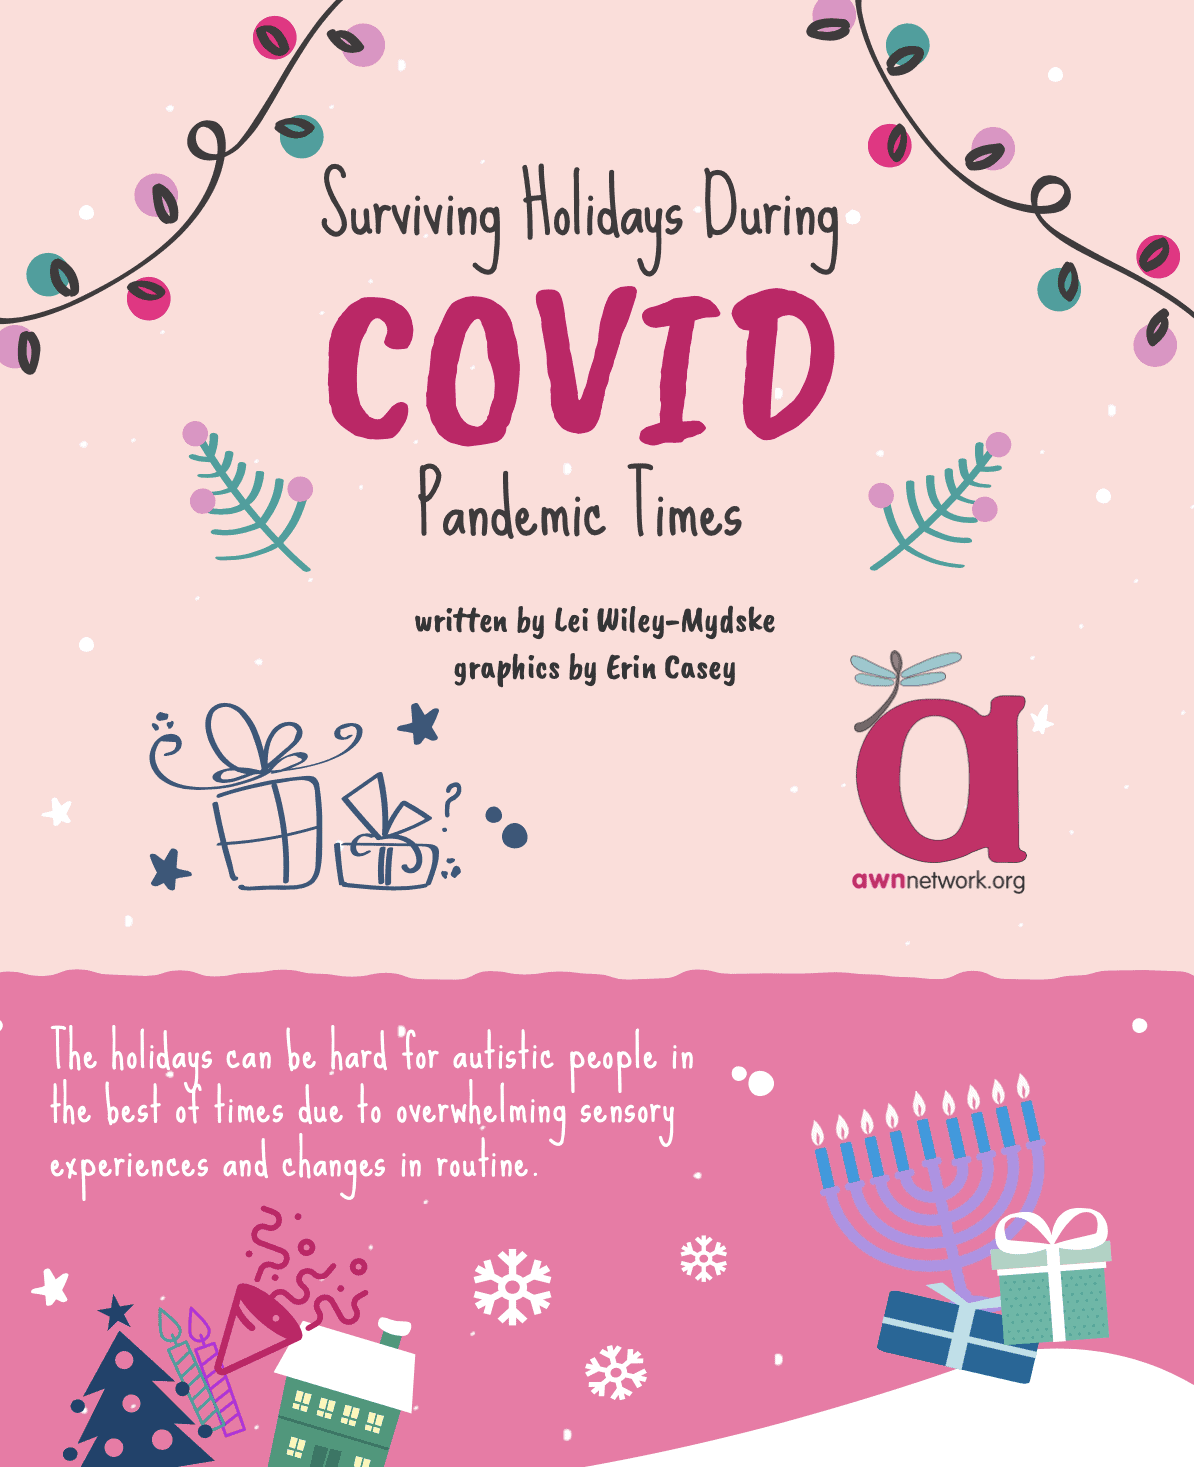 Surviving Holidays During COVID Pandemic Times, written by Lei Wiley-Mydske graphics by Erin Casey. The holidays can be hard for autistic people in the best of times due to overwhelming sensory experience and changes in routine.